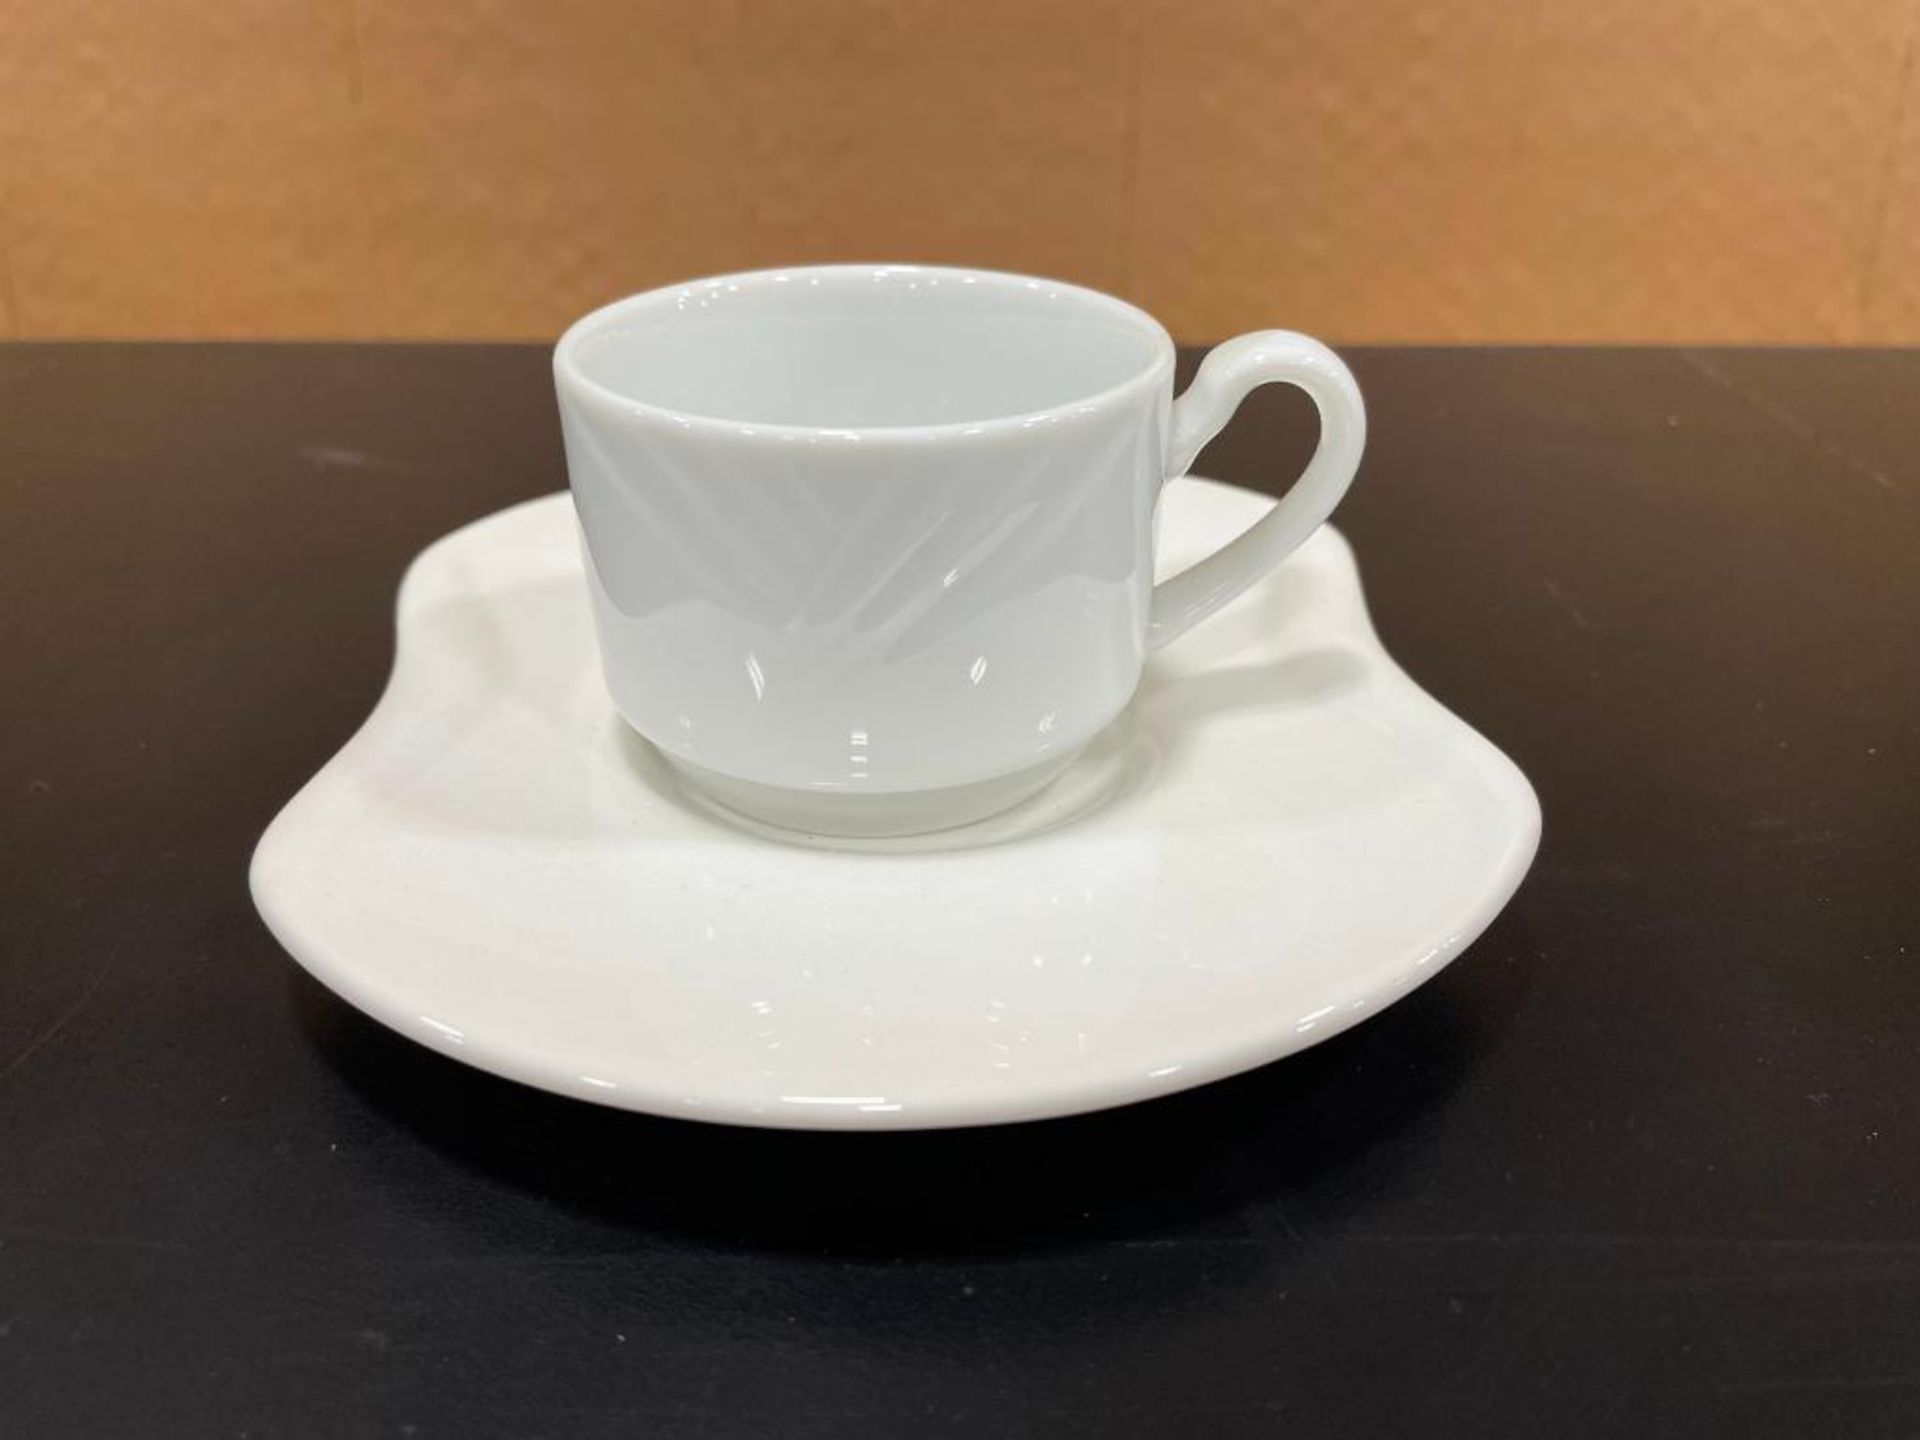 ESPRESSO CUP WITH SAUCER SET - NEW - SET OF 72 - Image 6 of 7